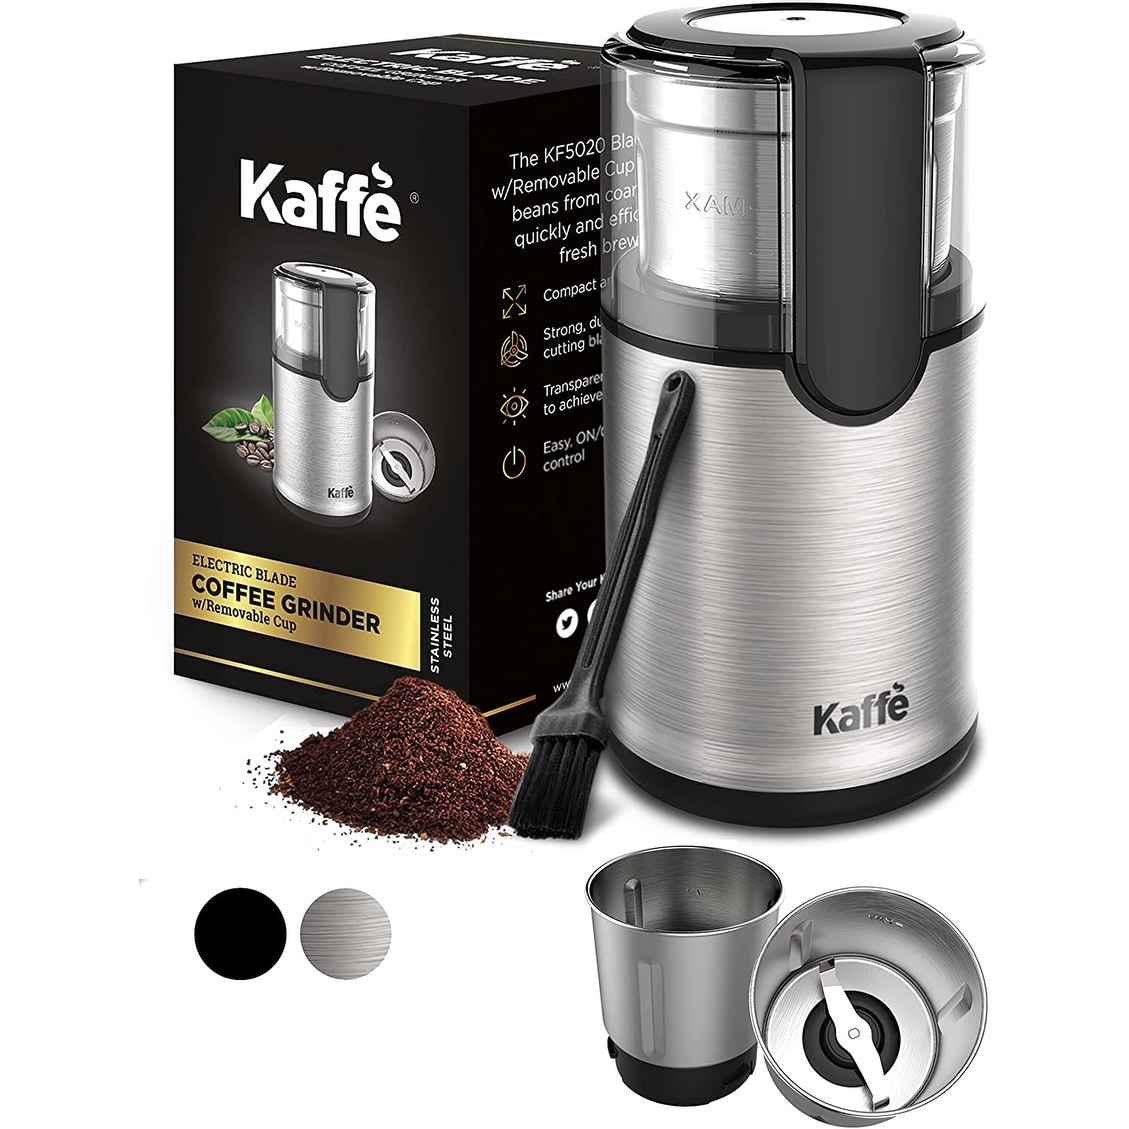 https://ak1.ostkcdn.com/images/products/is/images/direct/6b9c1fc9ab3dec21077ead3eabe5590be7670586/Kaffe-Electric-Blade-Coffee-Grinder-Removable-4.5oz-14-Cup-Capacity.jpg